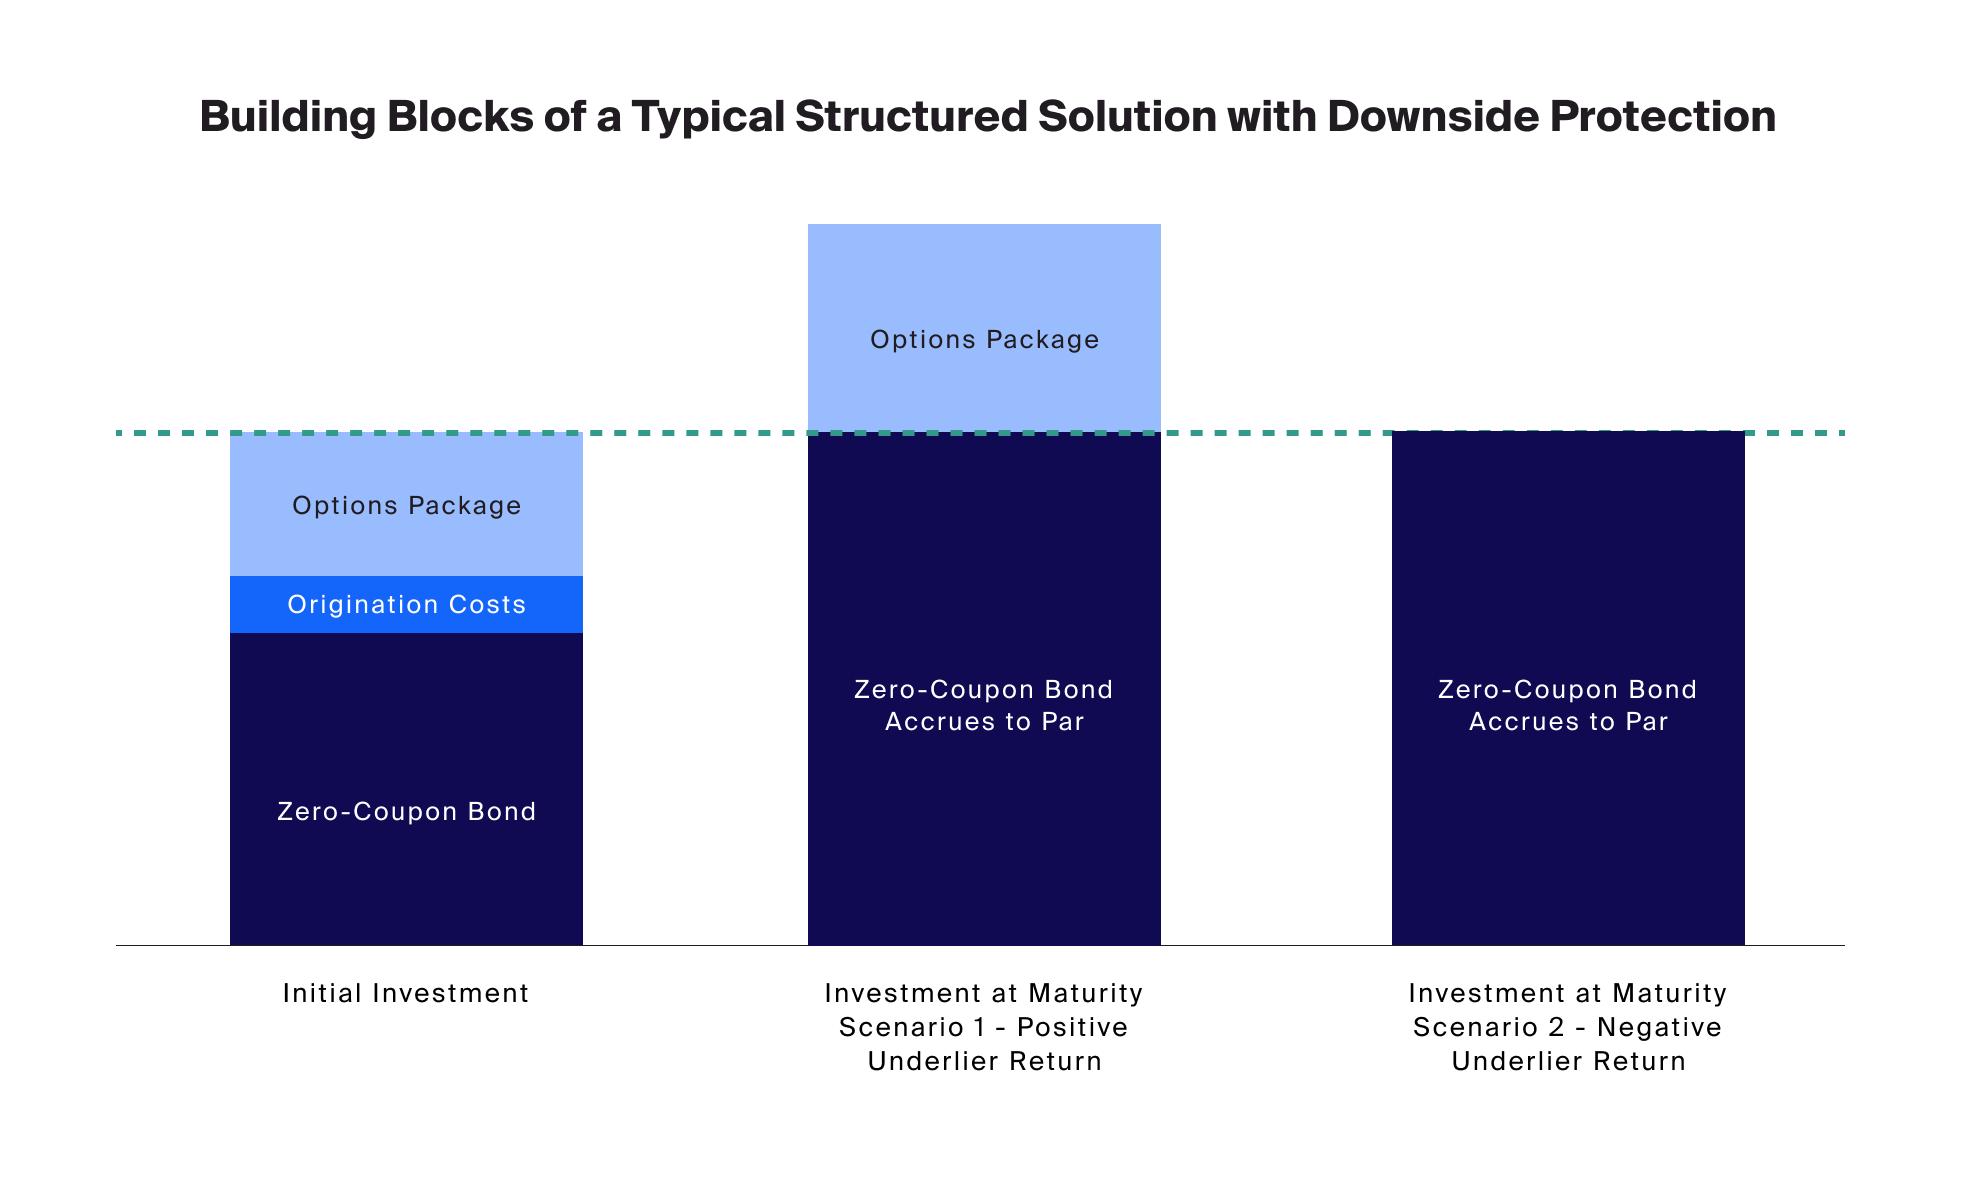 Exhibit 1: Illustration of the structure of a typical structured solution with downside protection